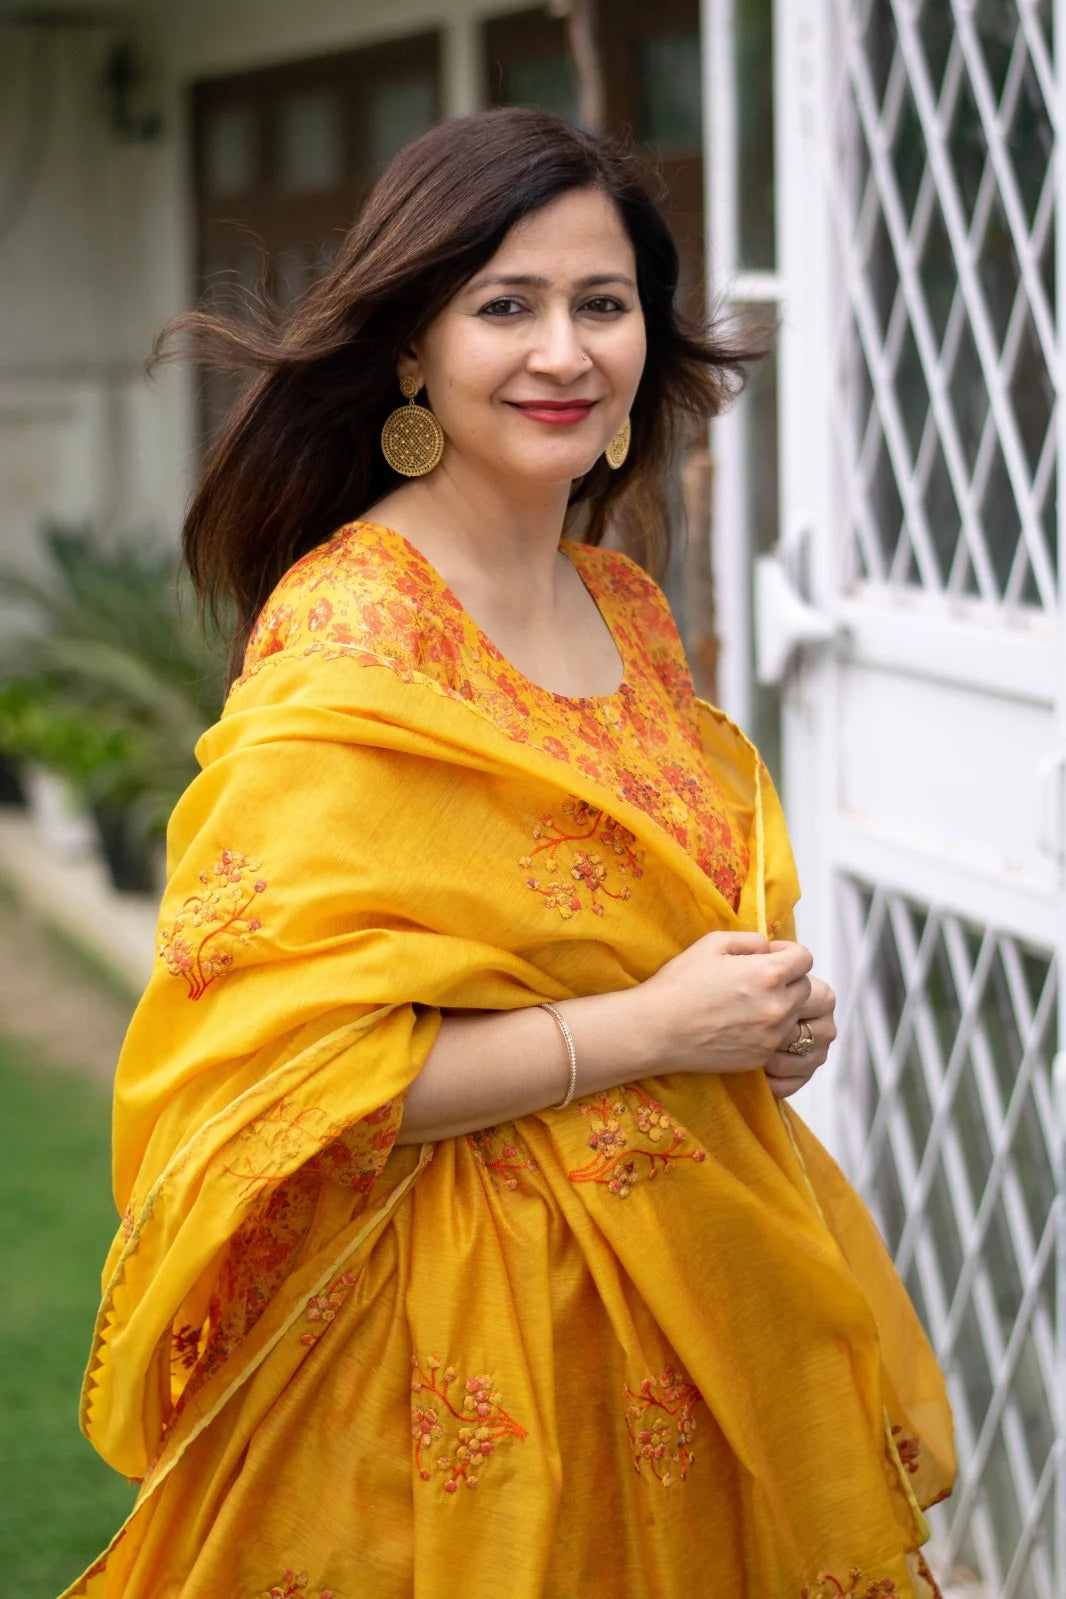 Make a statement with this gorgeous yellow Chanderi Kurta, perfect for any occasion.